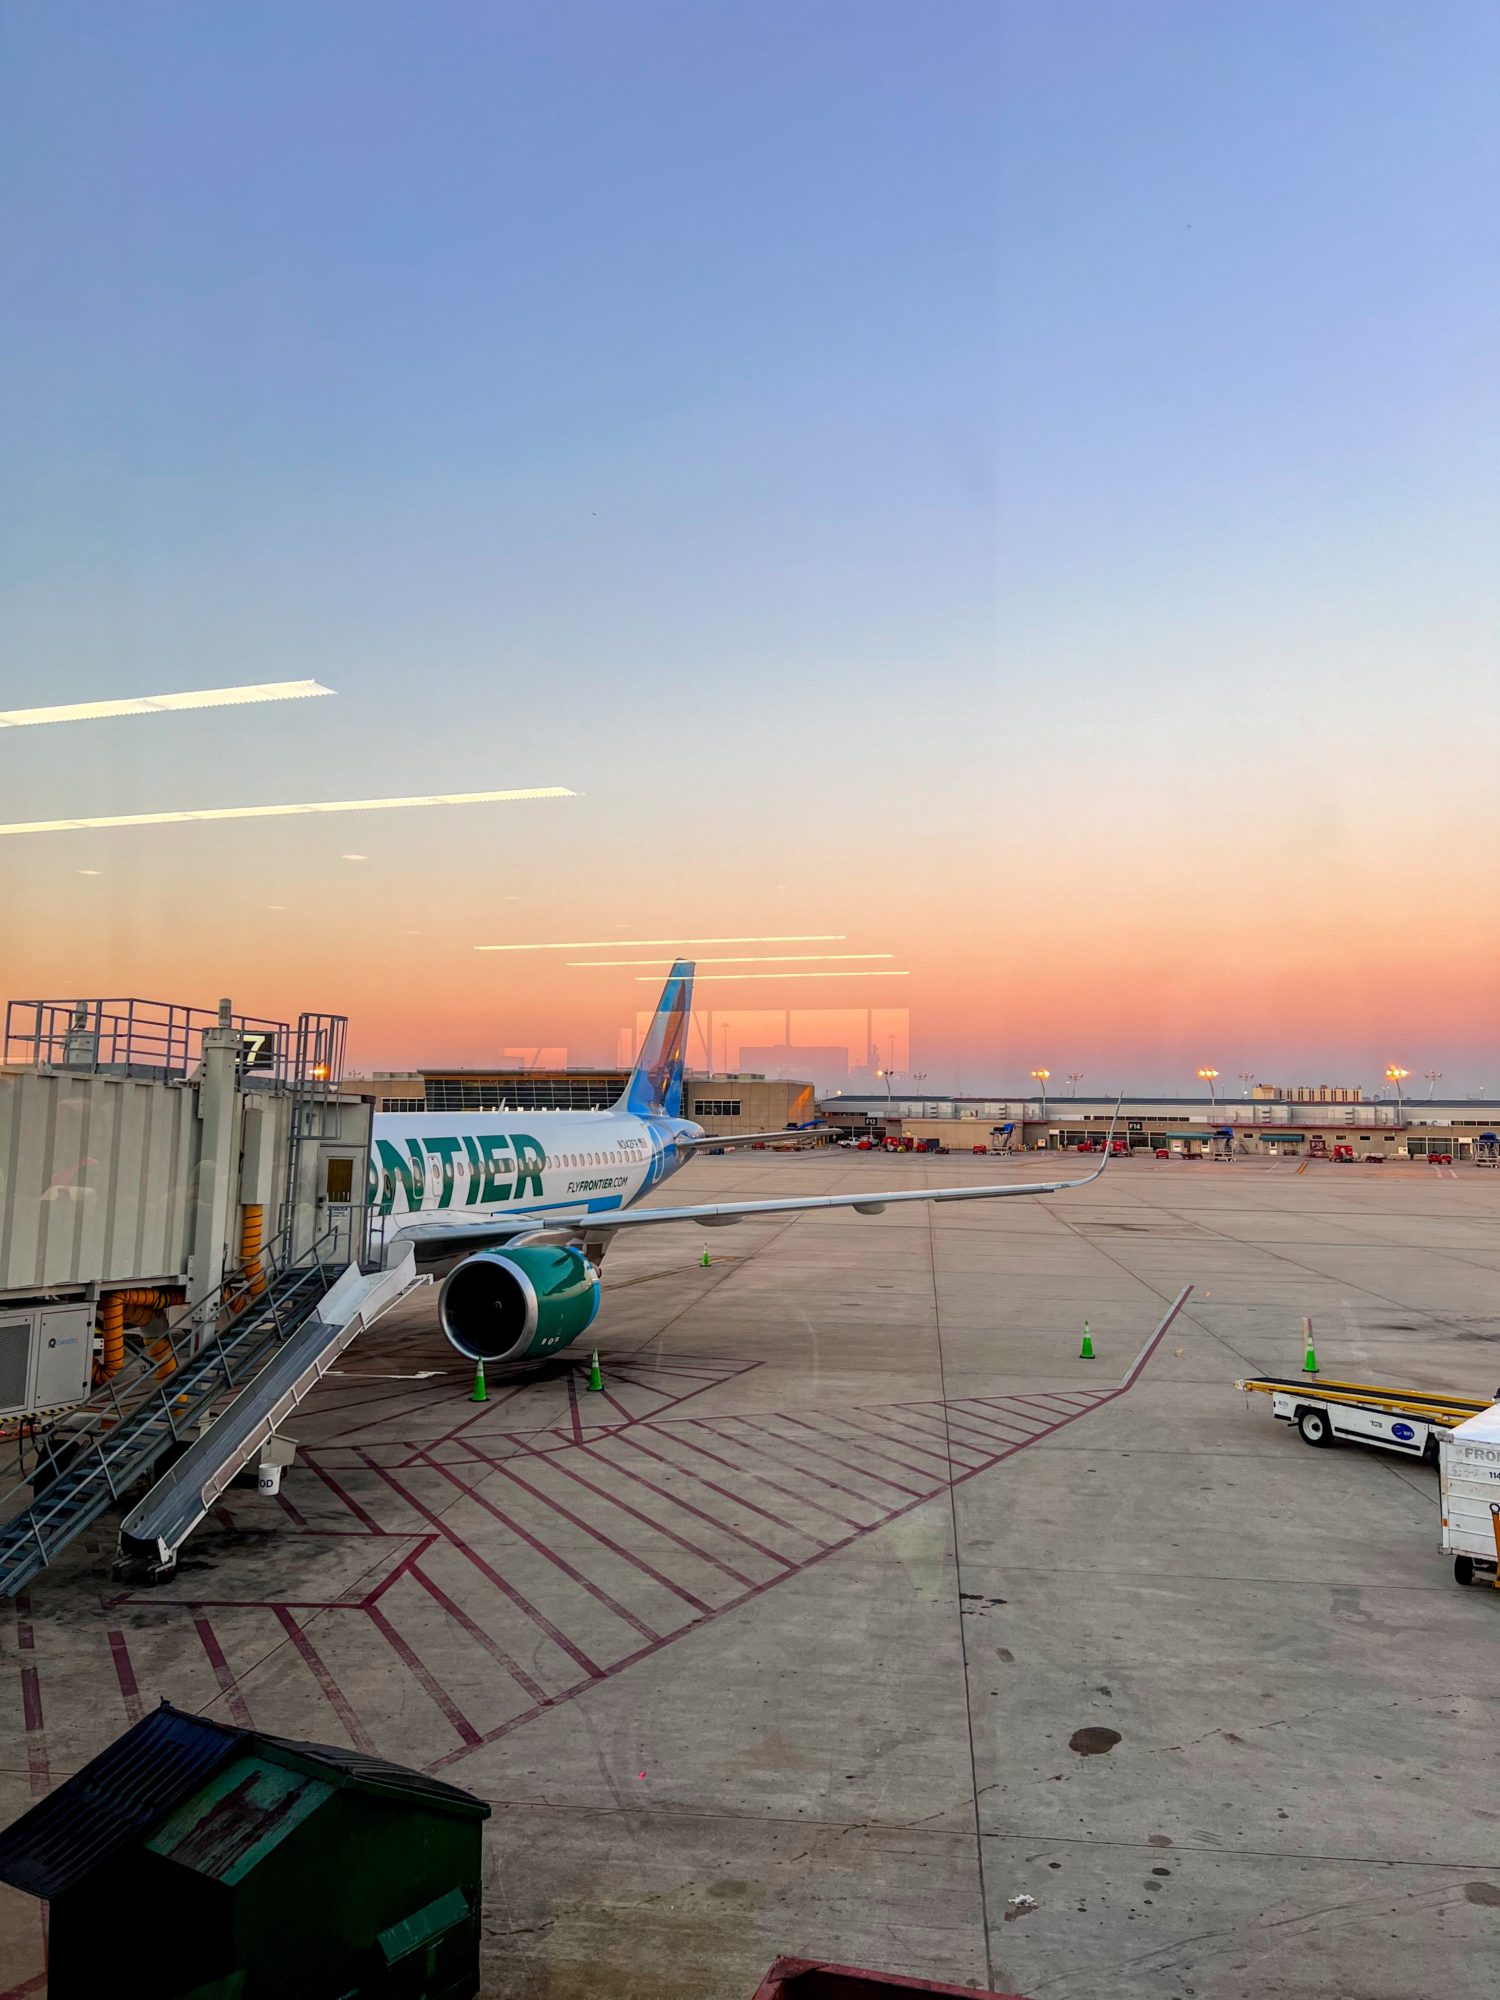 A Frontier plane at dusk